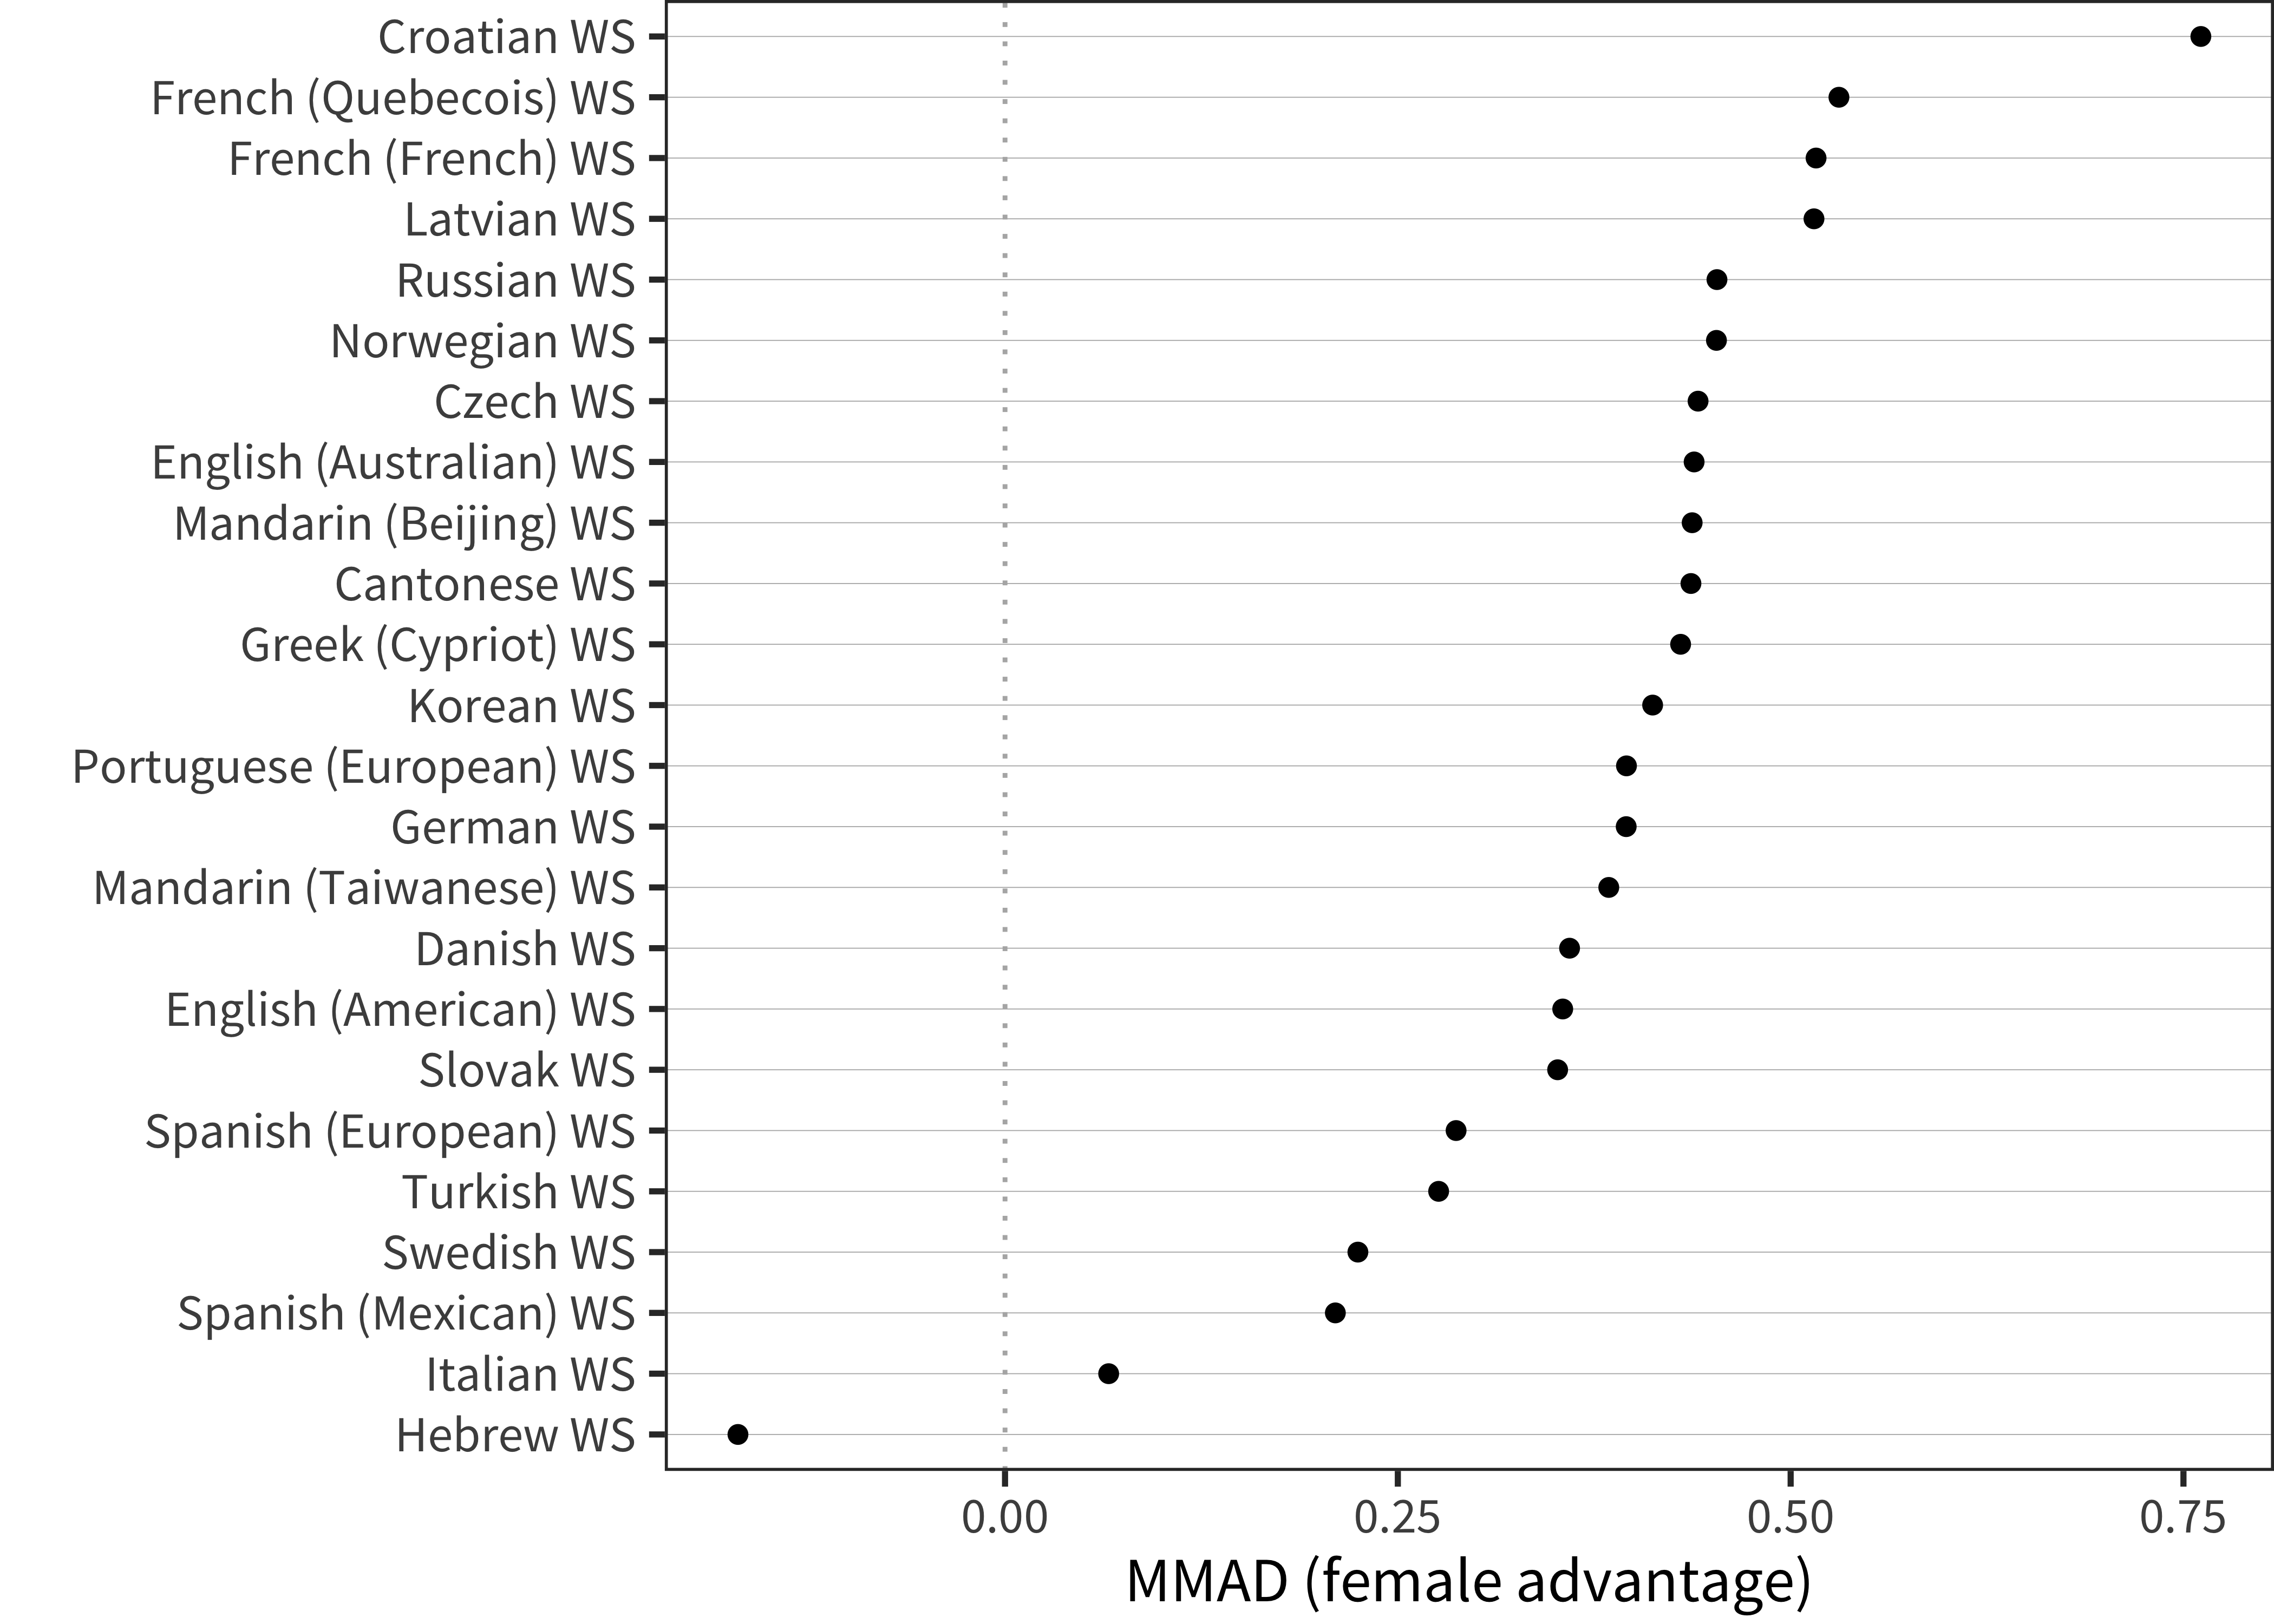 MMAD female advantage for WS production data in each language averaged over age.